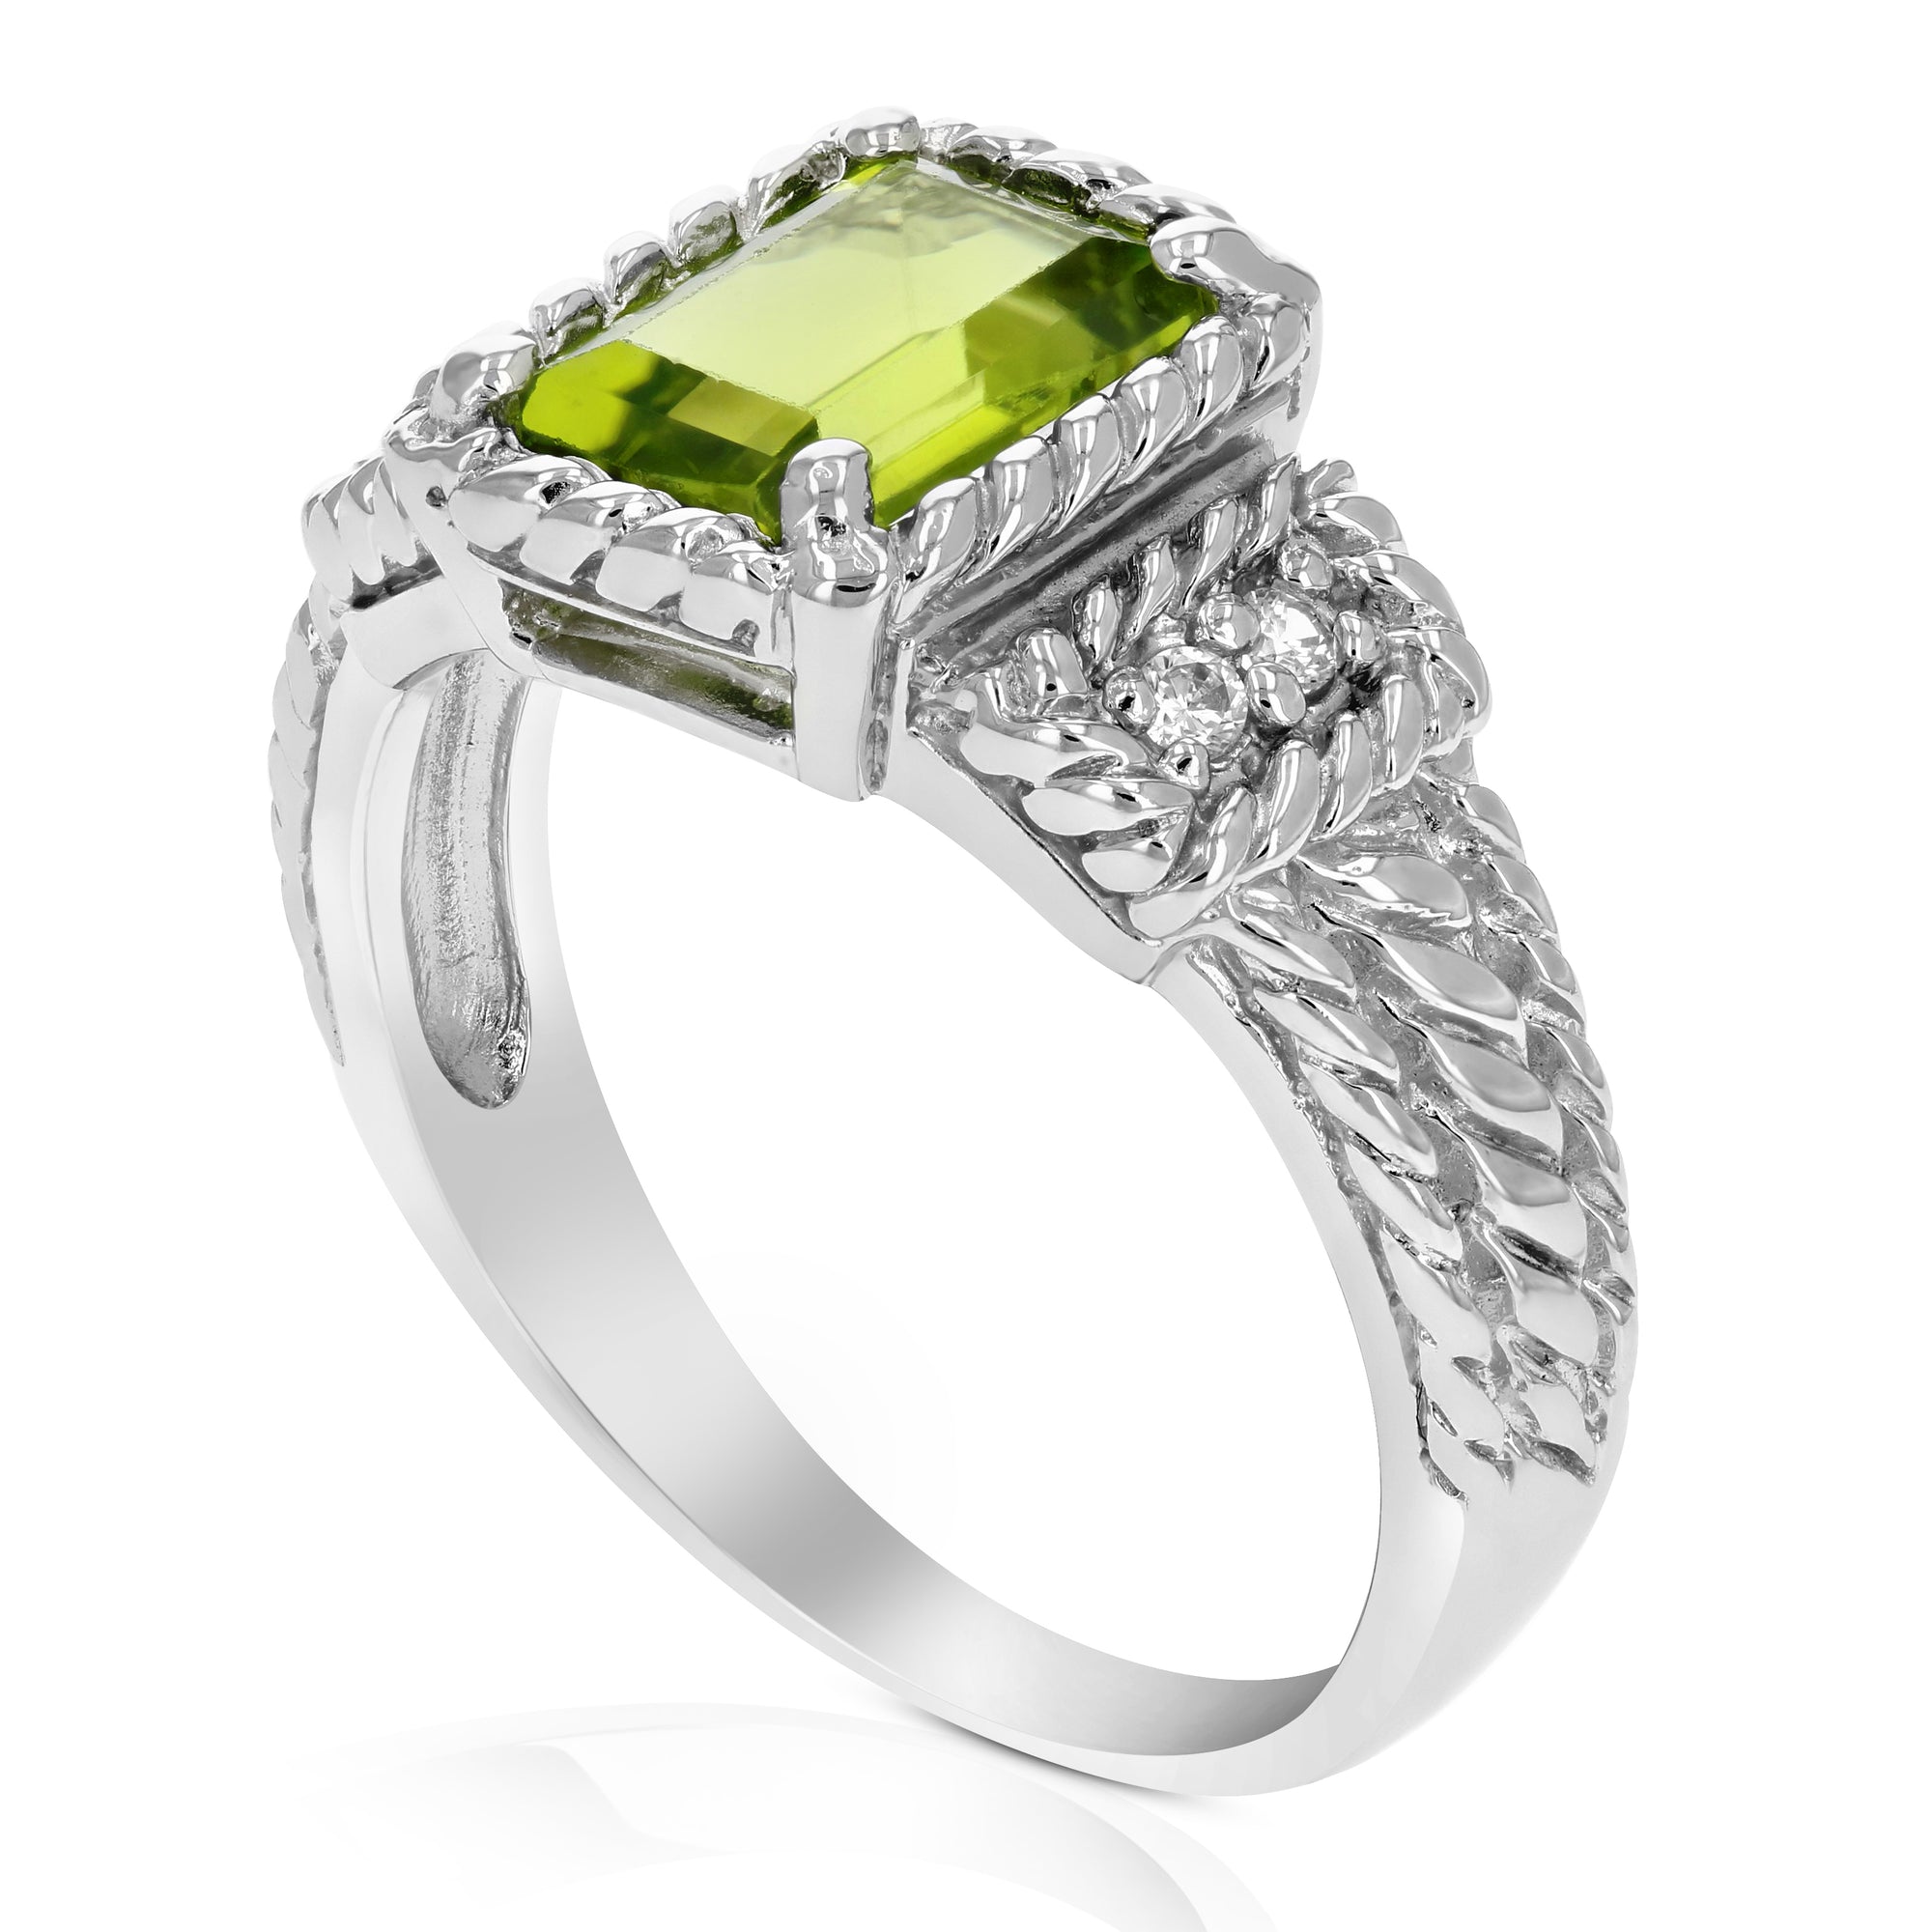 1.10 cttw Emerald Peridot Ring .925 Sterling Silver with Rhodium Plating 8x6 MM